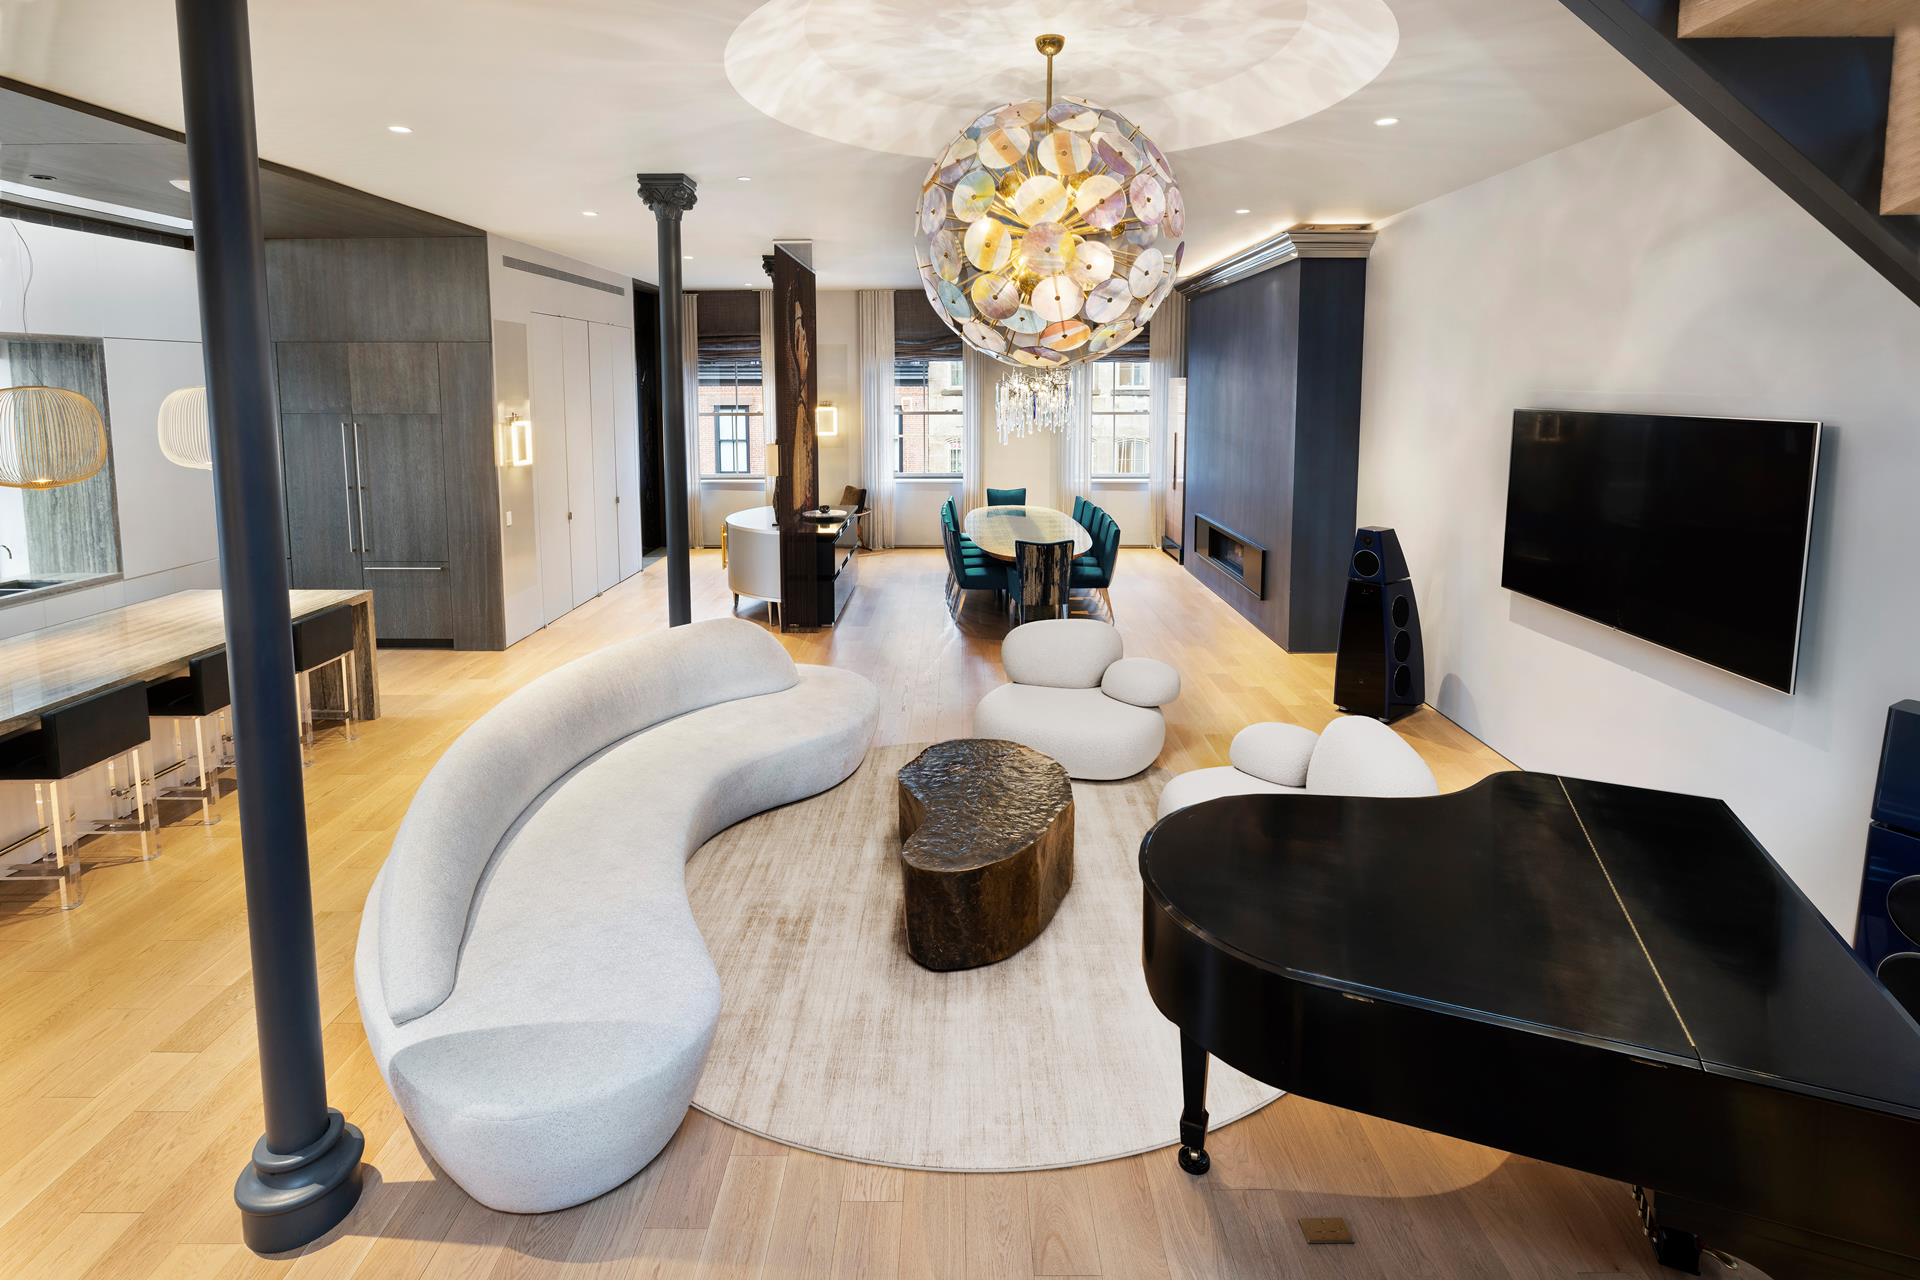 25 Mercer Street Penthouse, Soho, Downtown, NYC - 4 Bedrooms  
4.5 Bathrooms  
9 Rooms - 